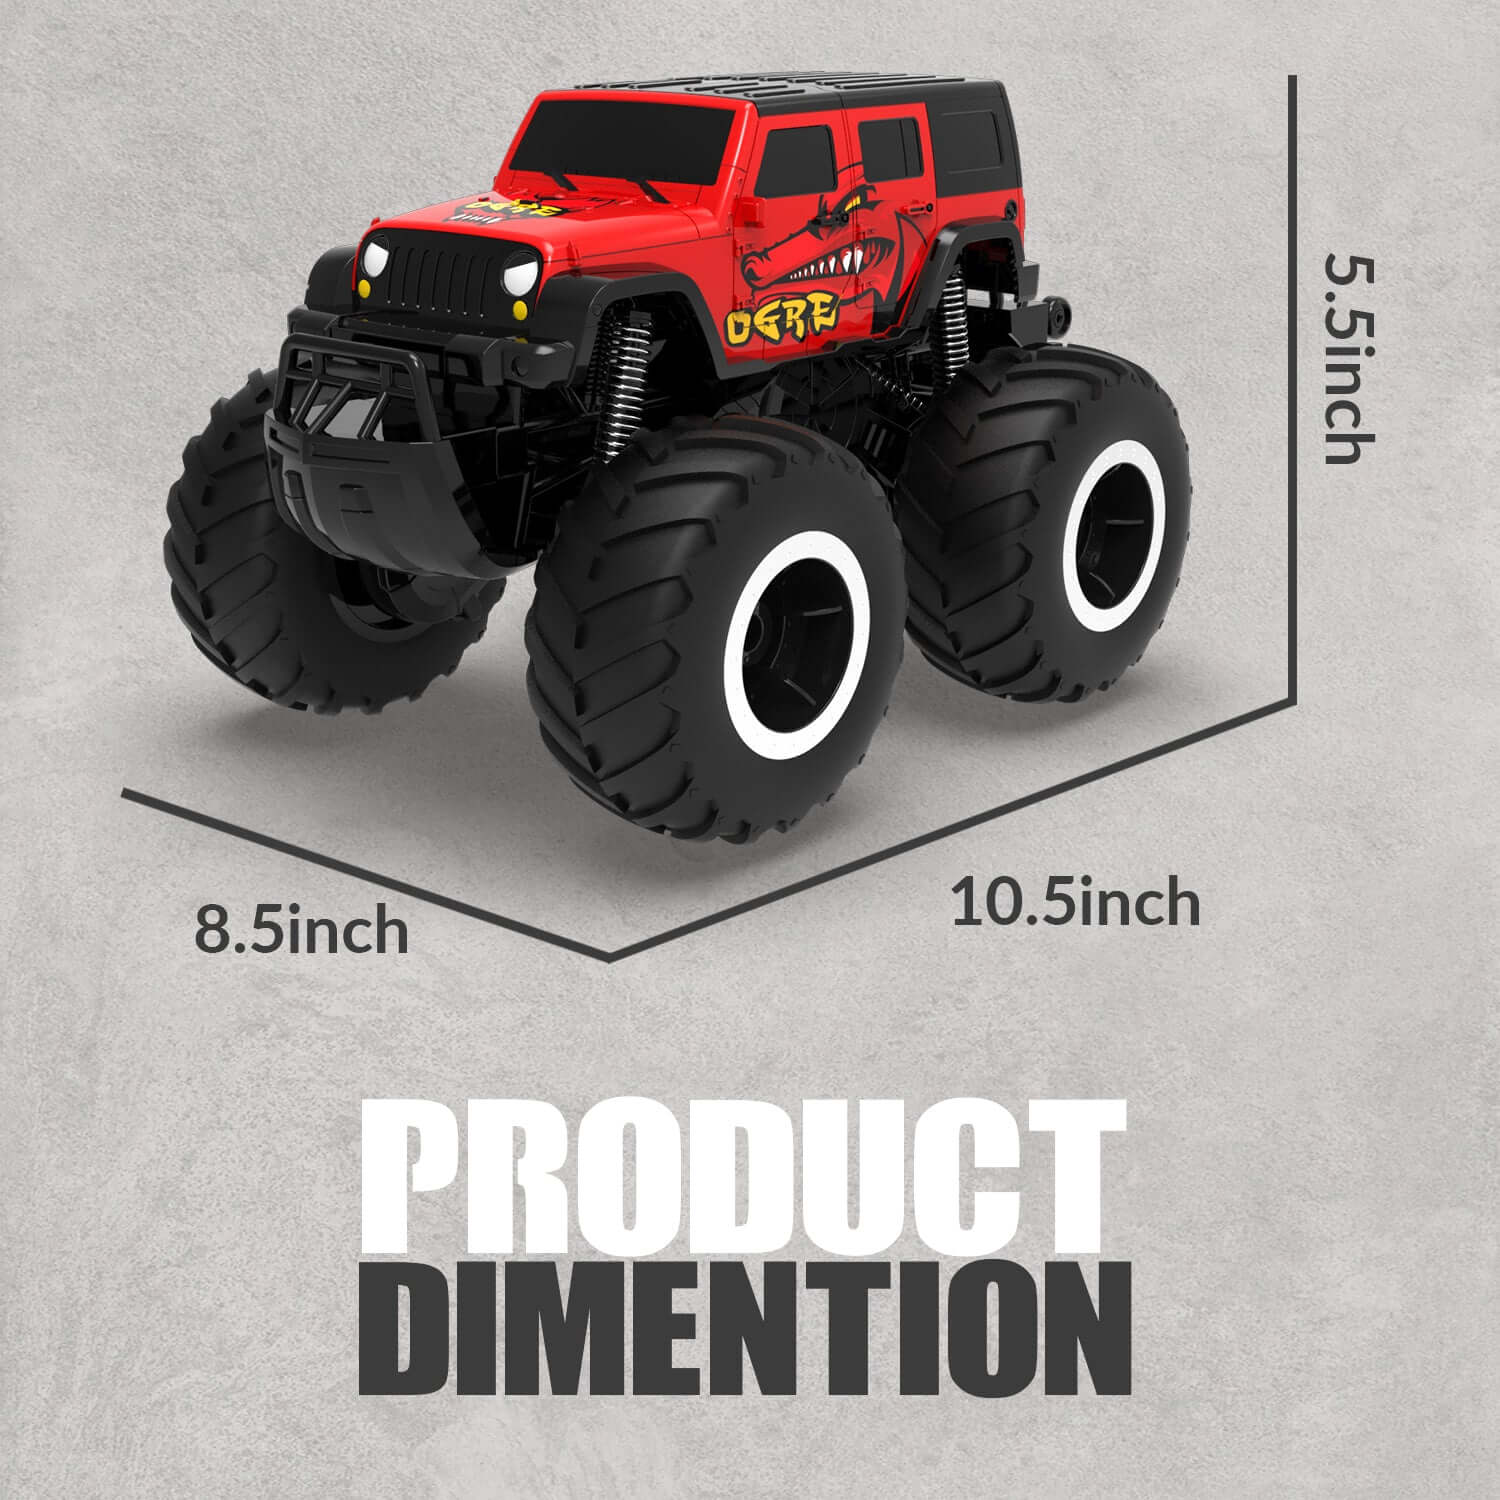 Amphibious All Terrain Off-Road Waterproof RC Monster Truck for Kids | KIDS TOY LOVER